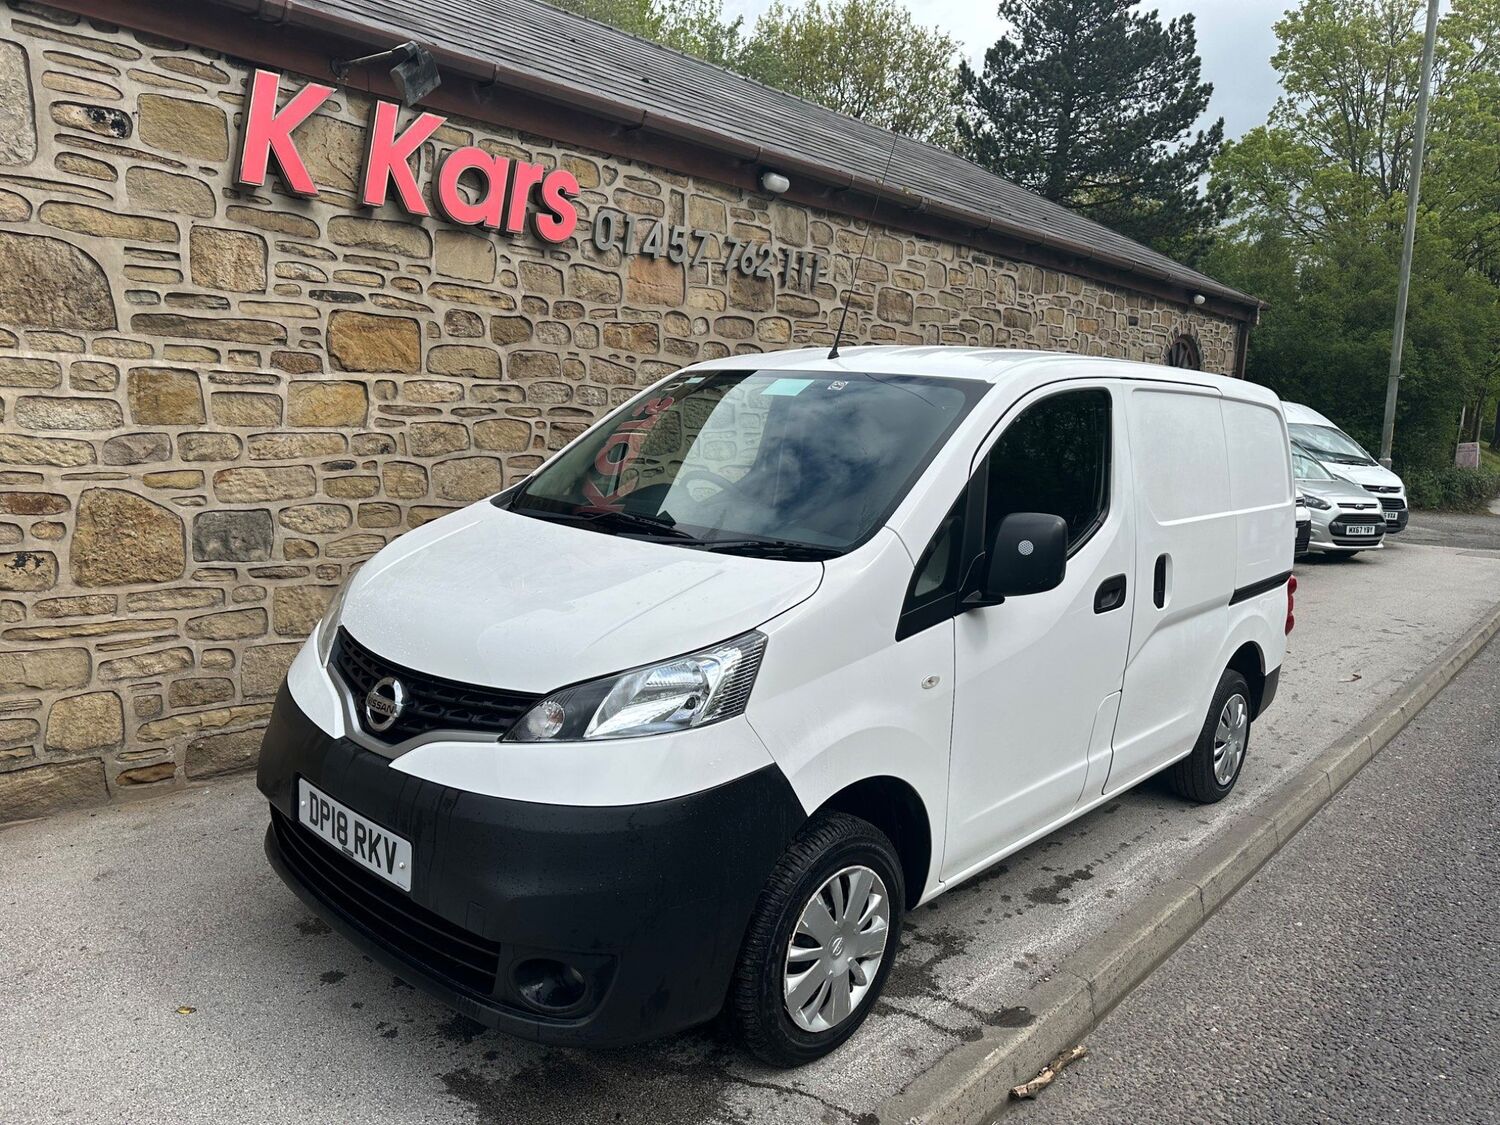 Used NISSAN NV200 in Hollingworth, Cheshire